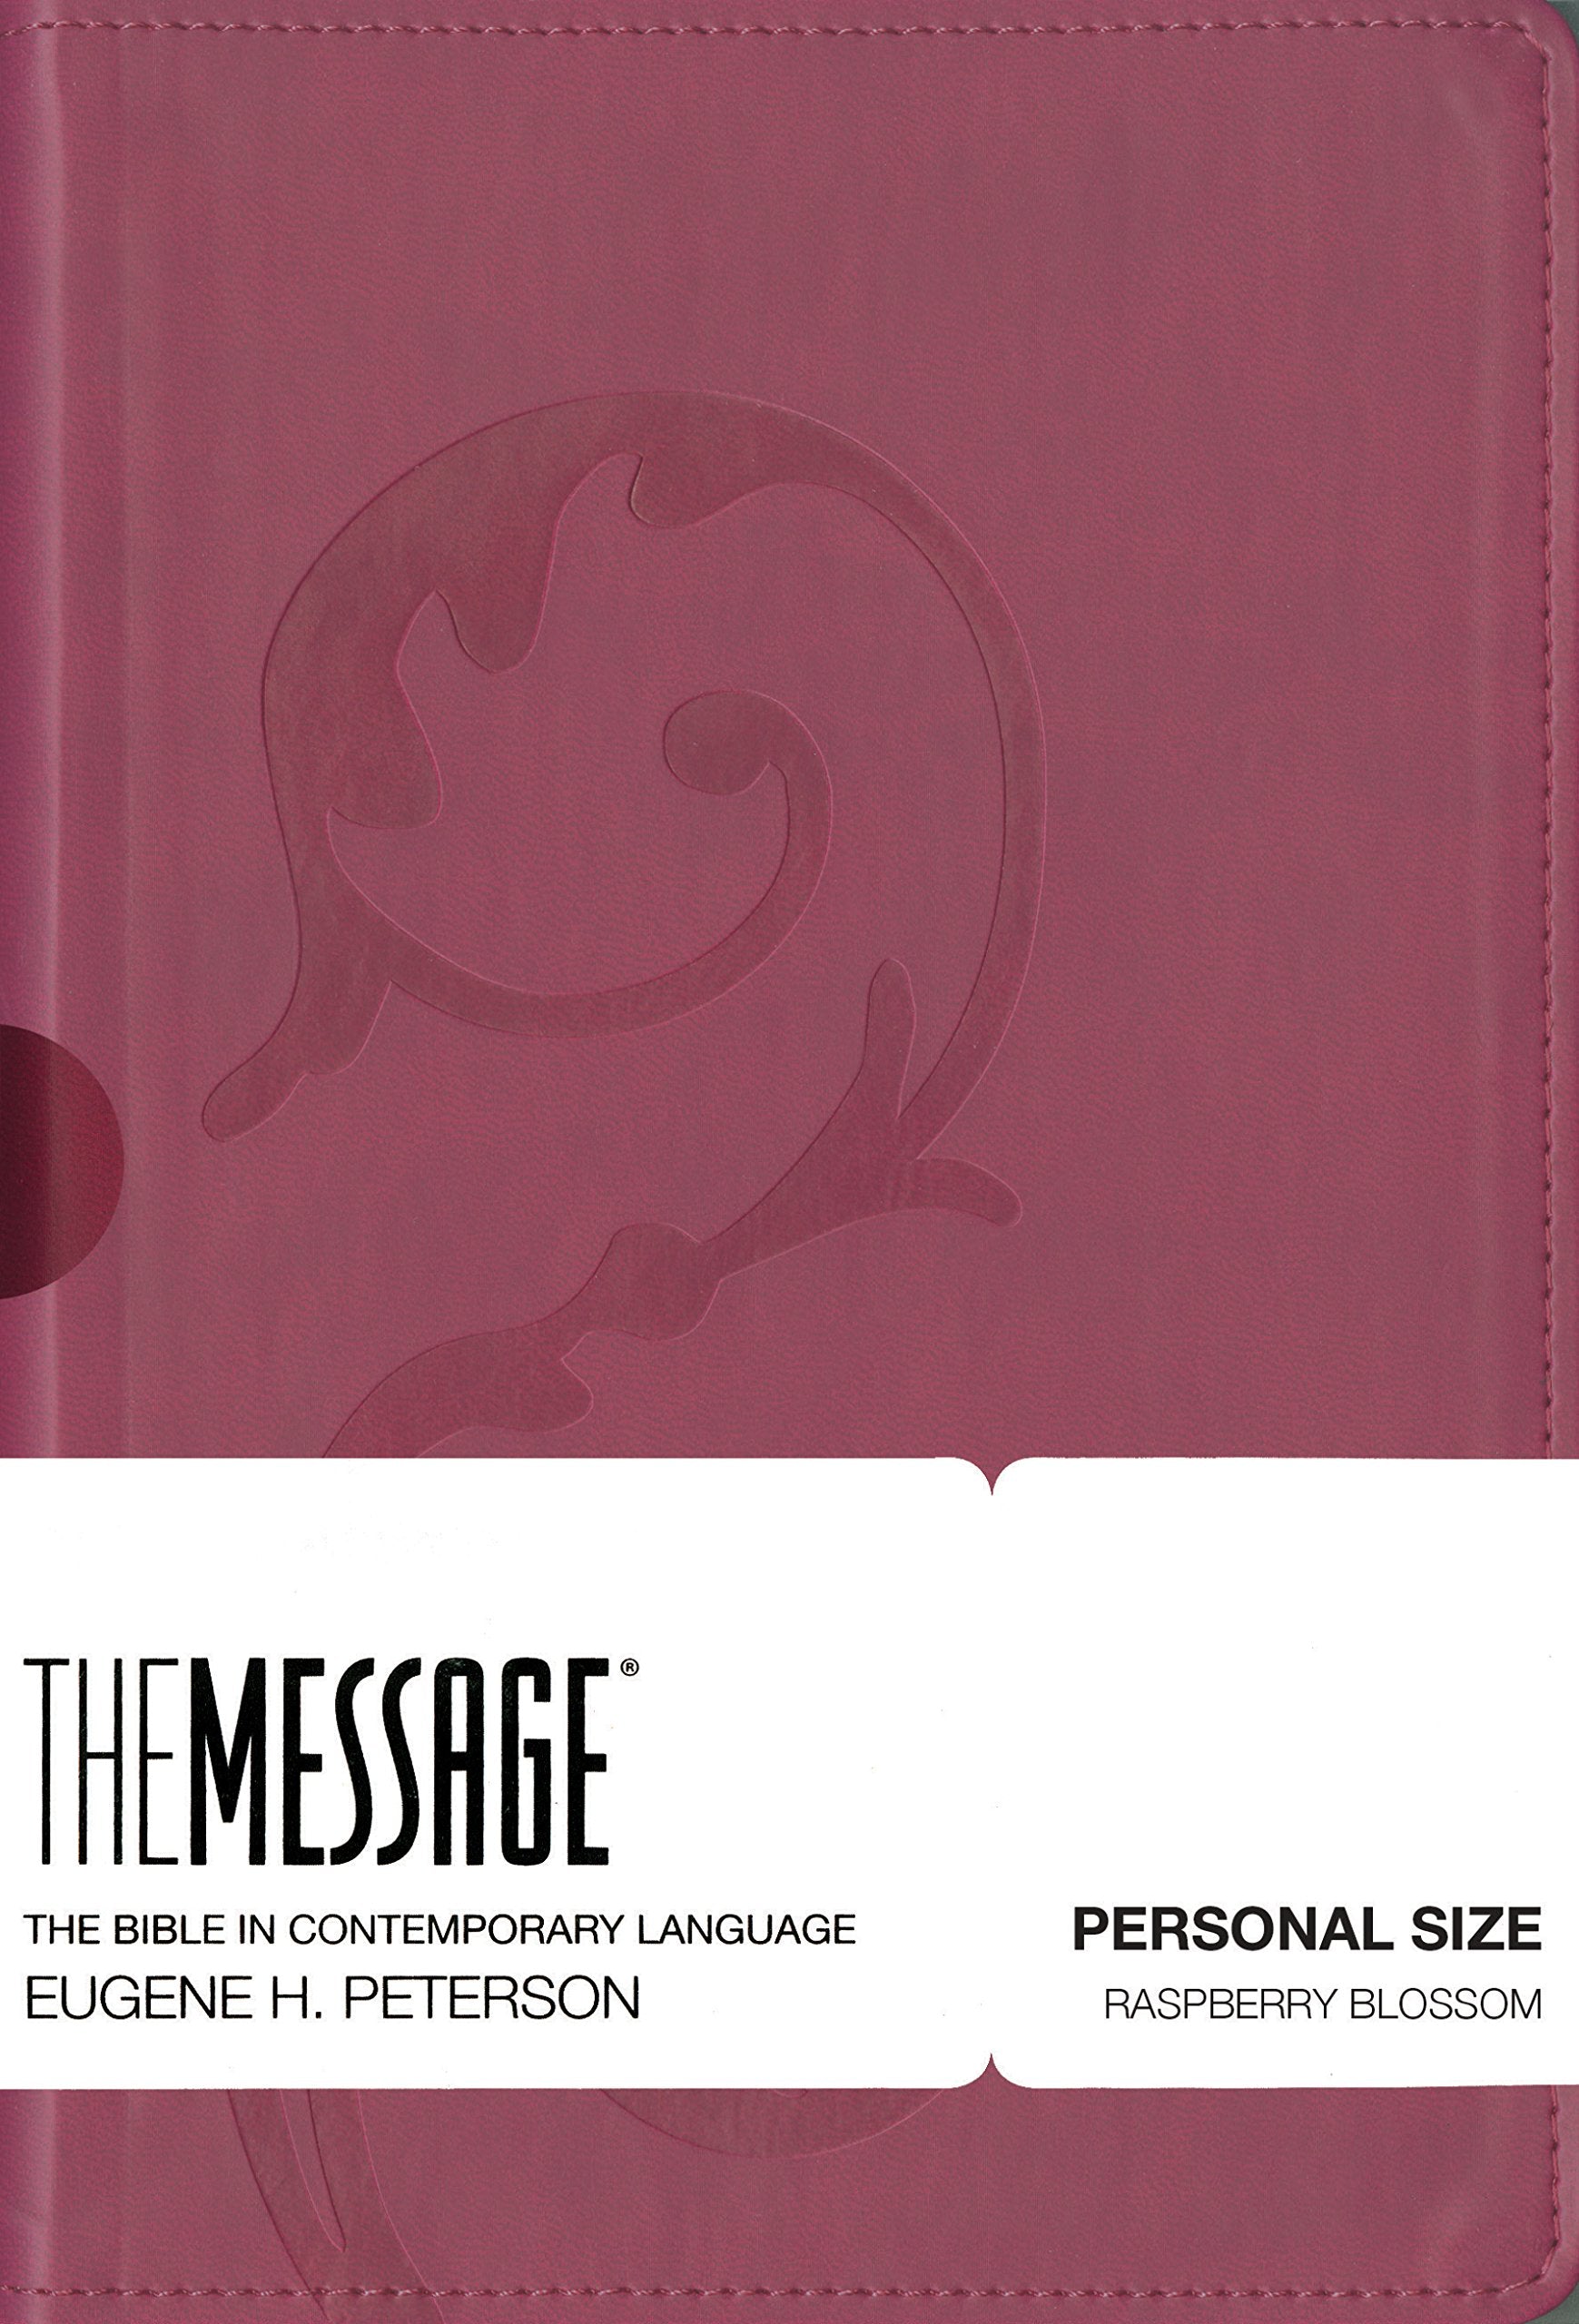 ROCKONLINE | The Message Bible, Personal Size Leather-Look, Raspberry Blossom | Eugene H. Peterson | MSG | New Creation Church | NCC | Joseph Prince | ROCK Bookshop | ROCK Bookstore | Star Vista | Free delivery for Singapore Orders above $50.